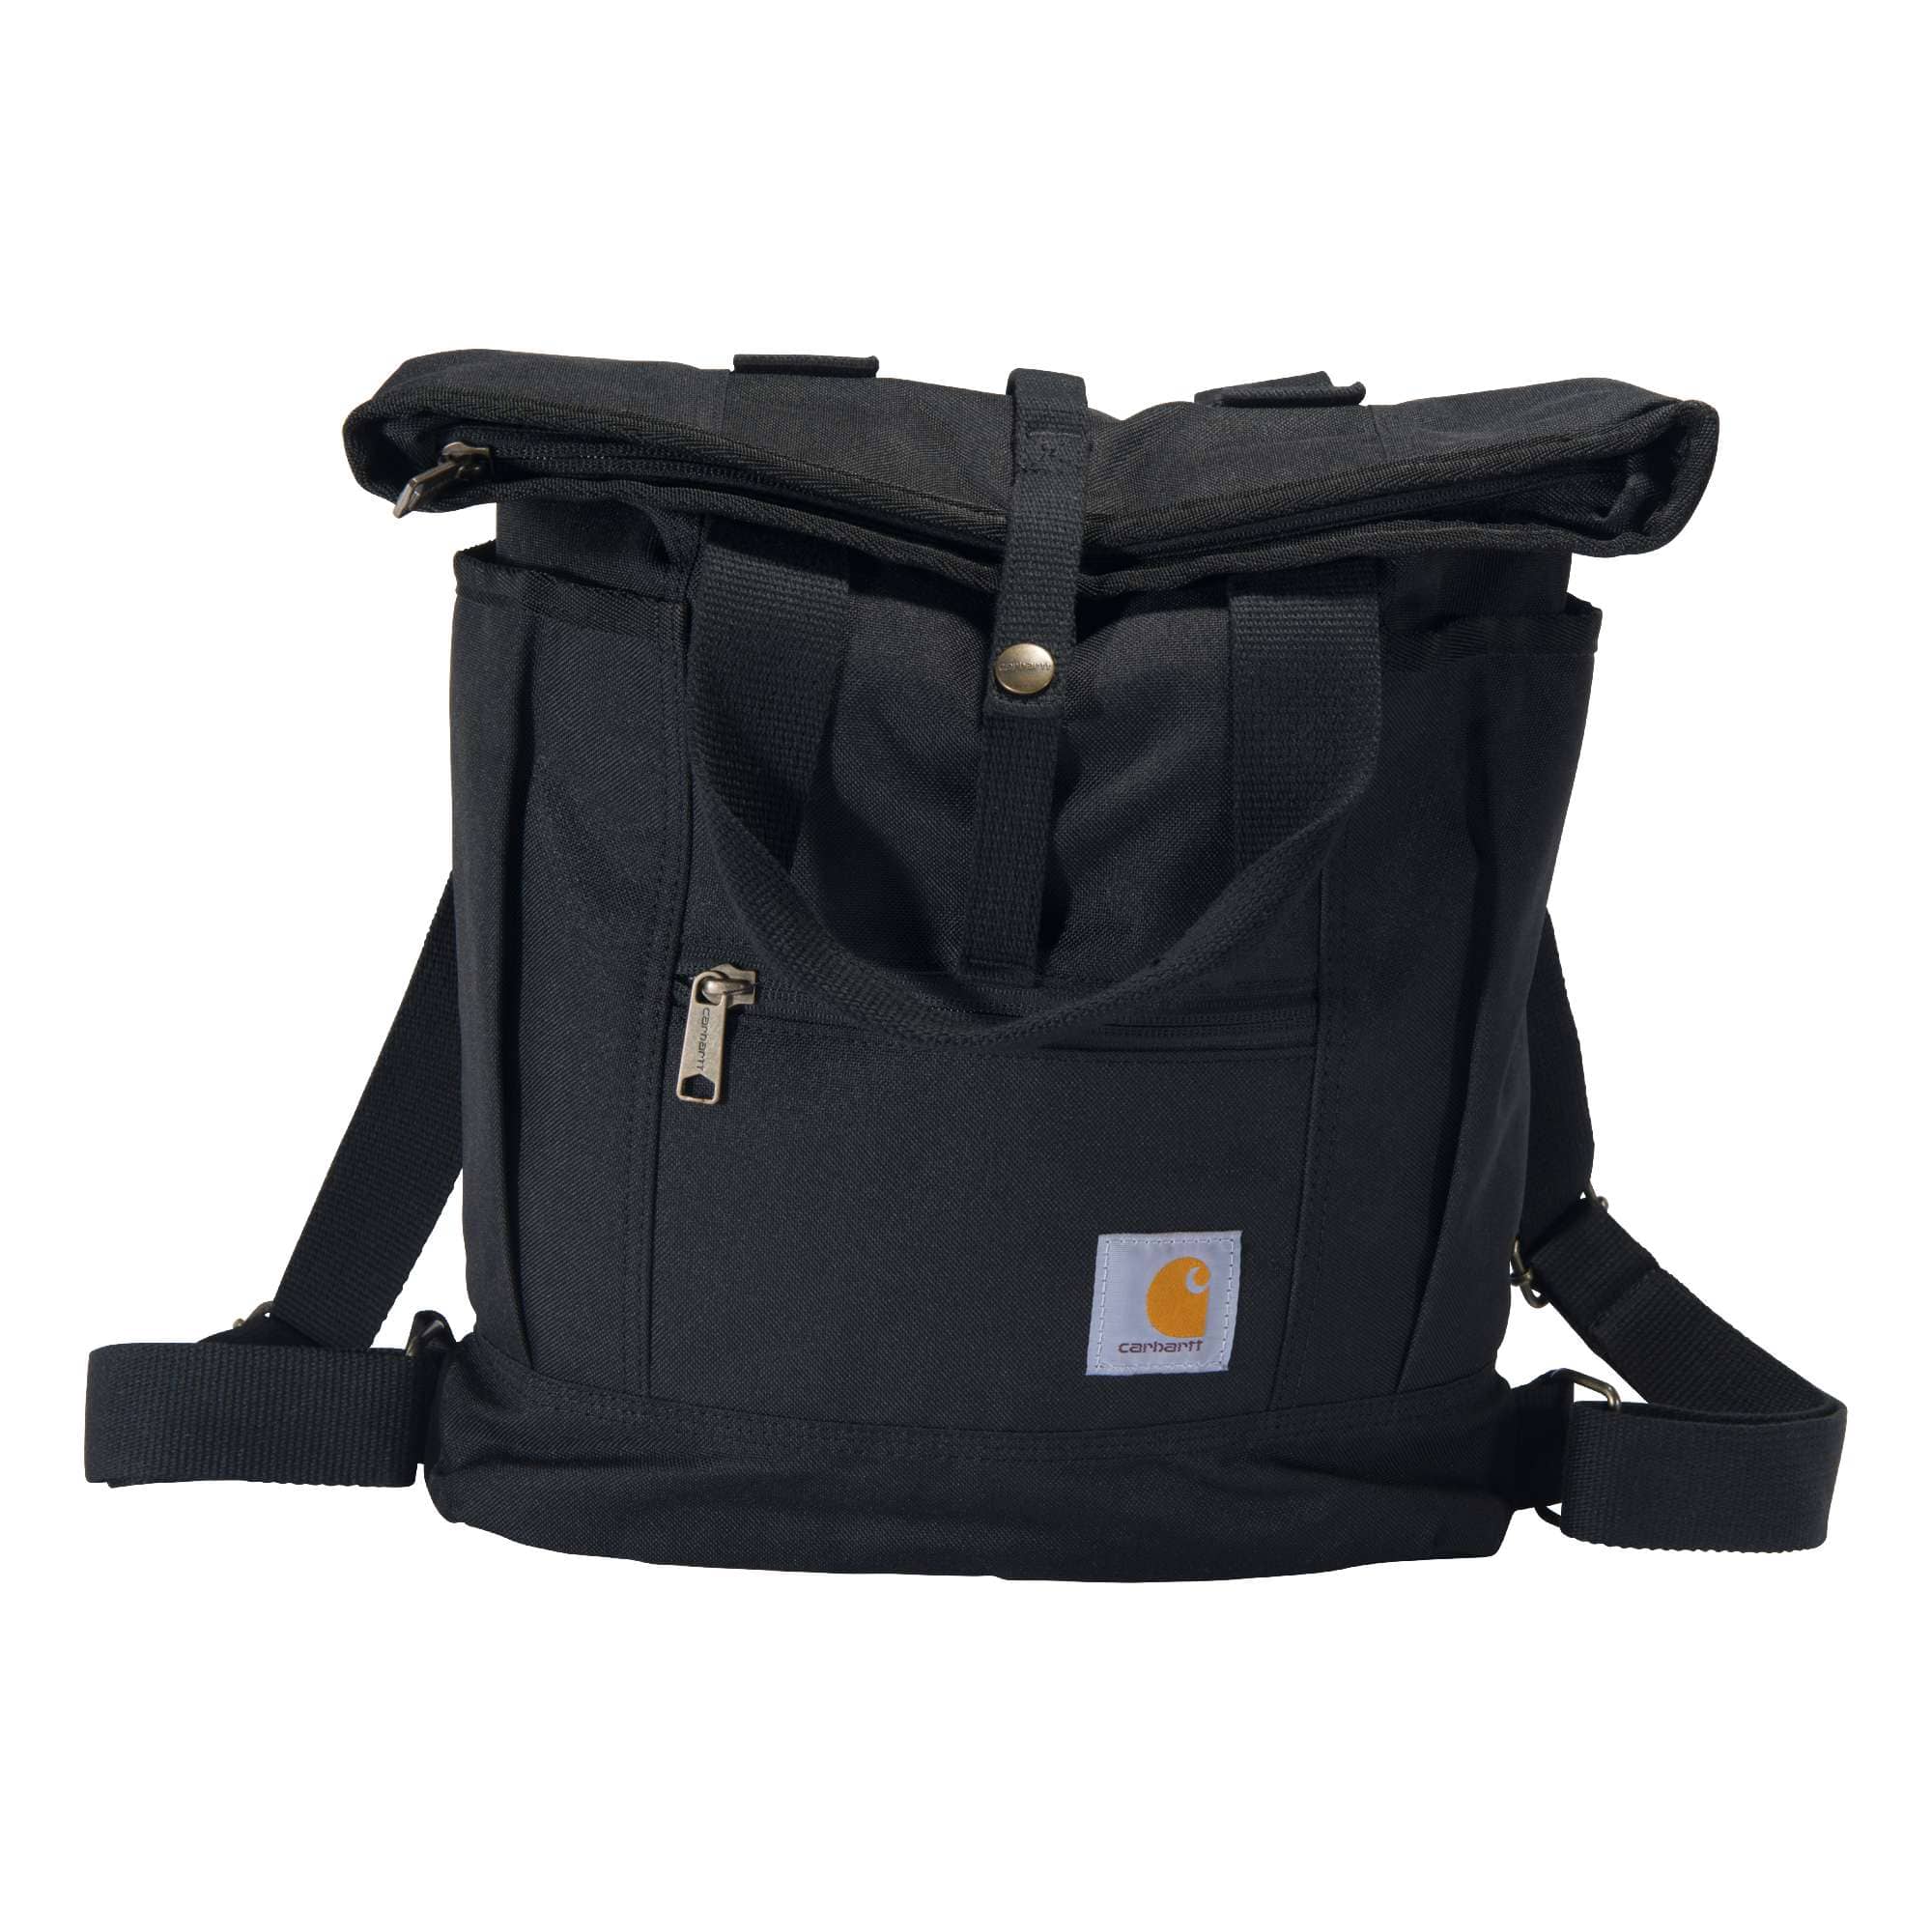 This Convertible Tote Backpack Is Nearly Half Off on